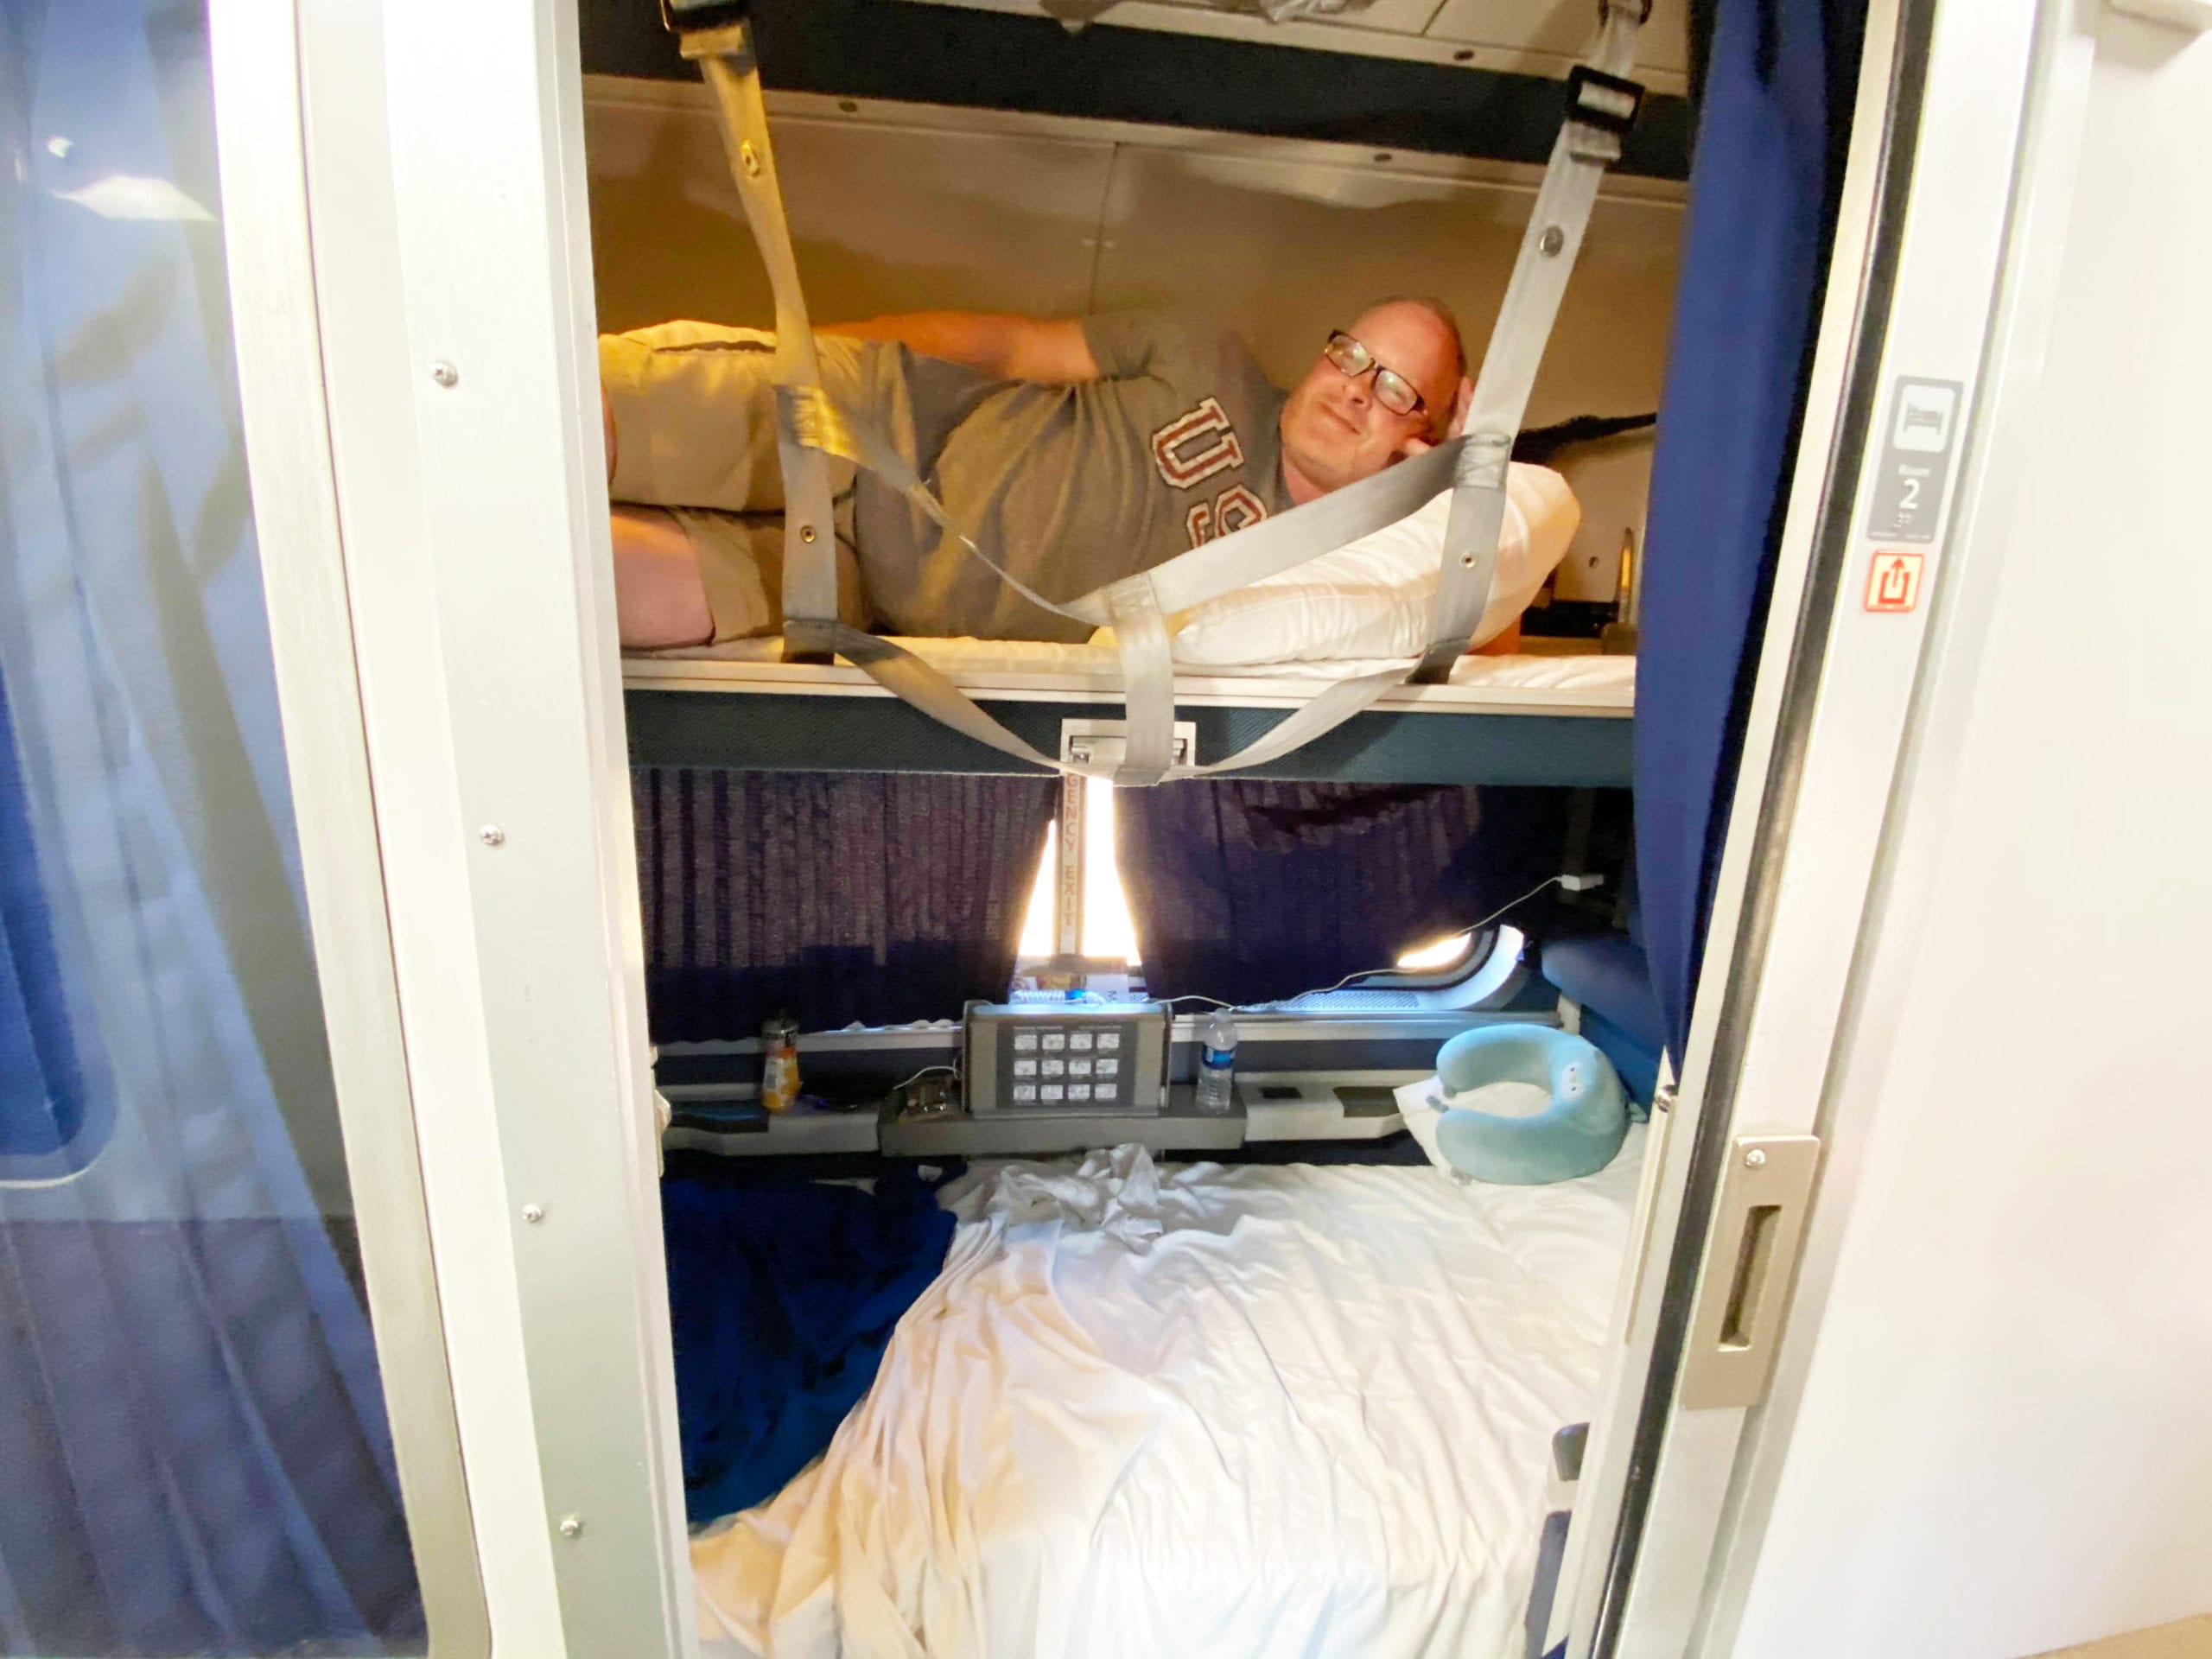 Amtrak Sleeper Cars Which Trains Have Them and How To Choose